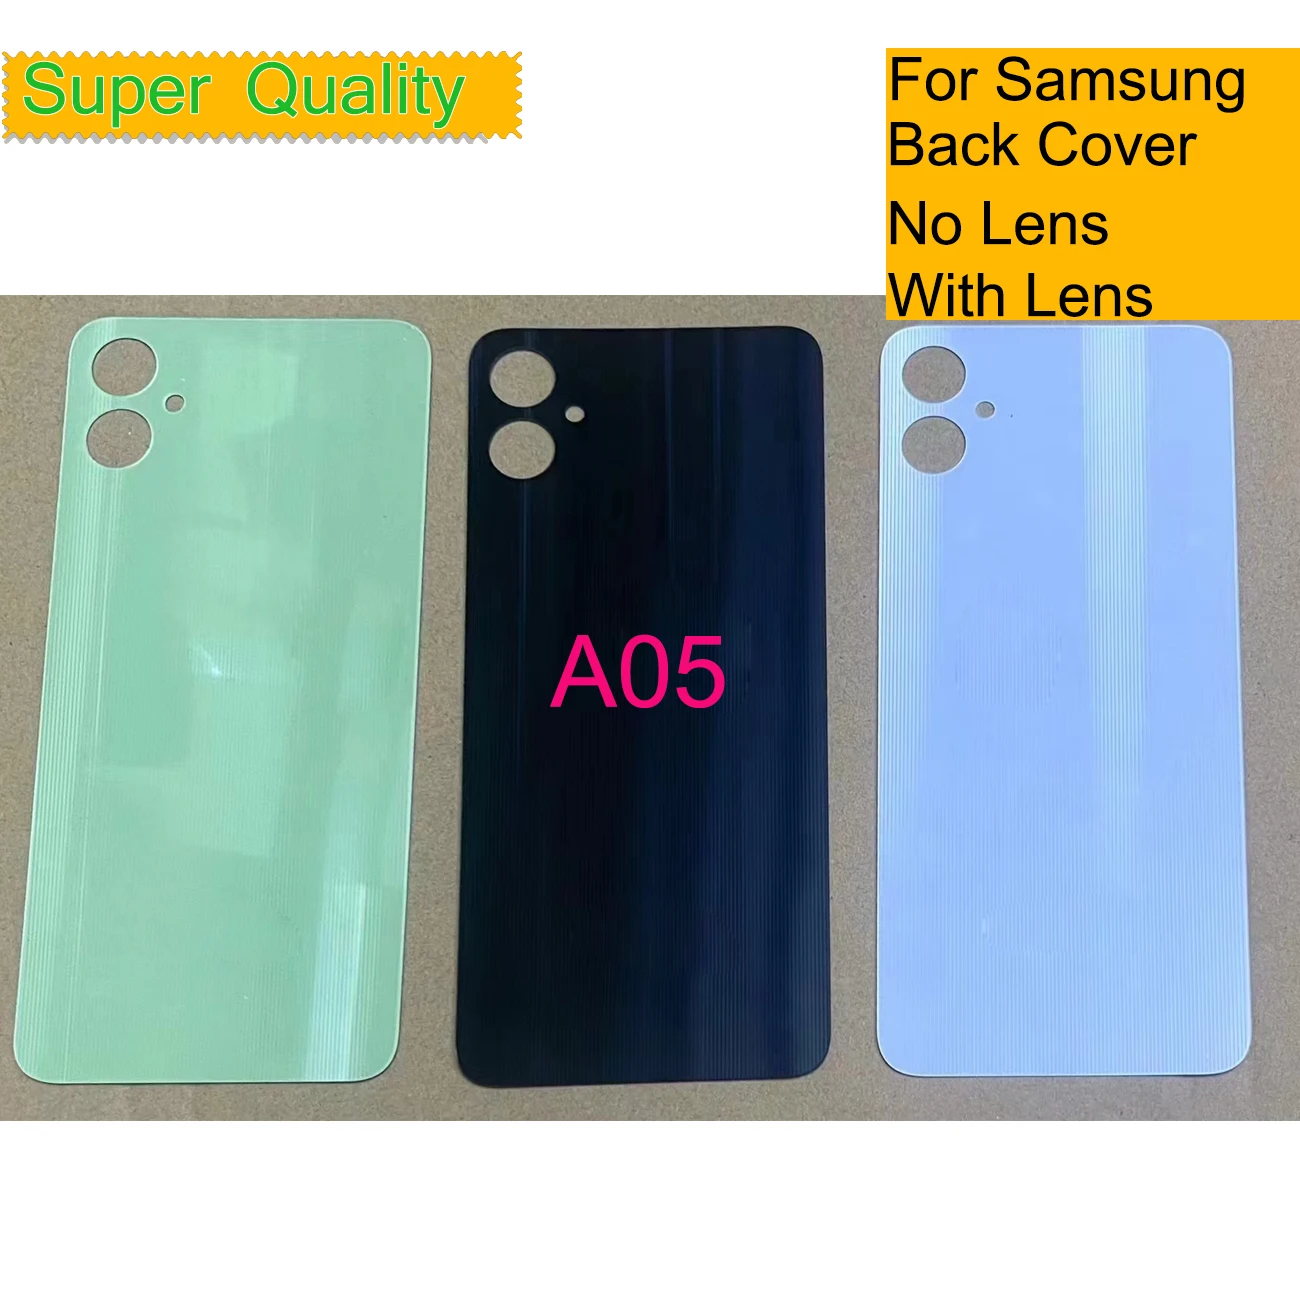 

10Pcs/Lot For Samsung Galaxy A05 A055 SM-A055F Housing Back Cover Case Rear Battery Door Chassis Housing Body Replacement